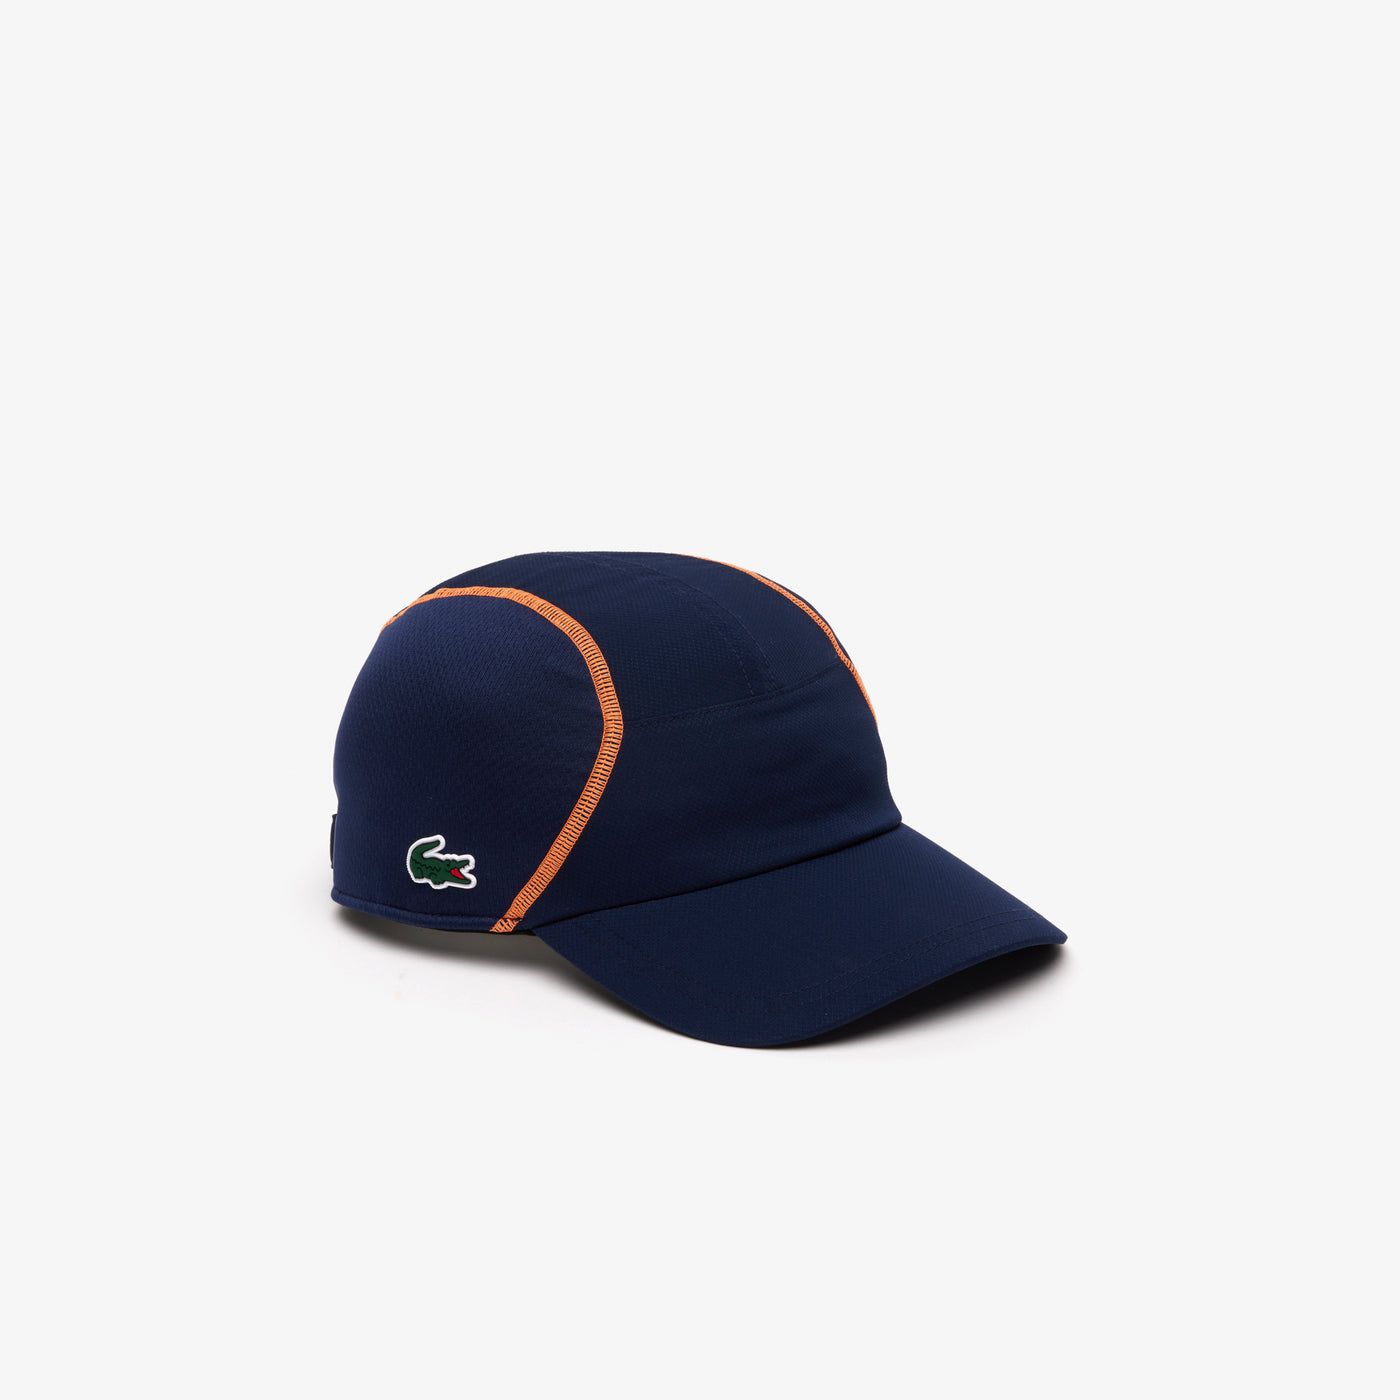 Shop The Latest Collection Of Lacoste Men’S Lacoste Tennis Mesh Panel Cap - Rk4971 In Lebanon